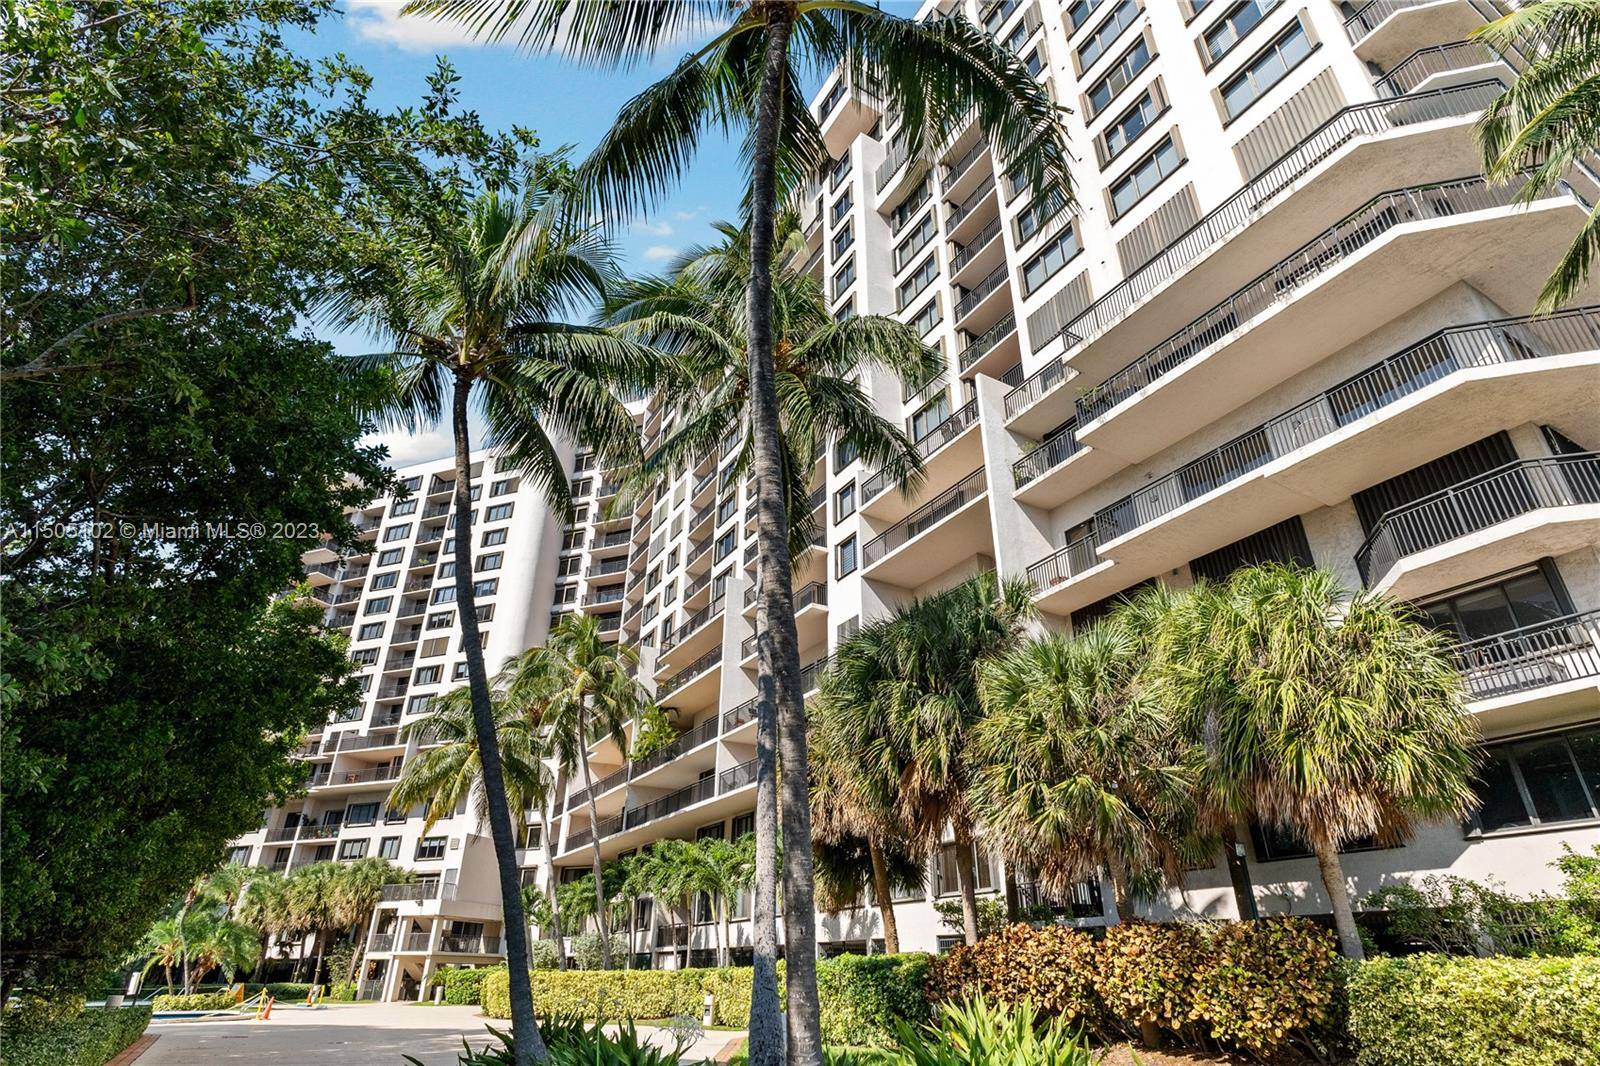 Enjoy this peaceful, charming, updated and partially furnished 2 bed 2 baths apartment in exclusive Brickell Key.